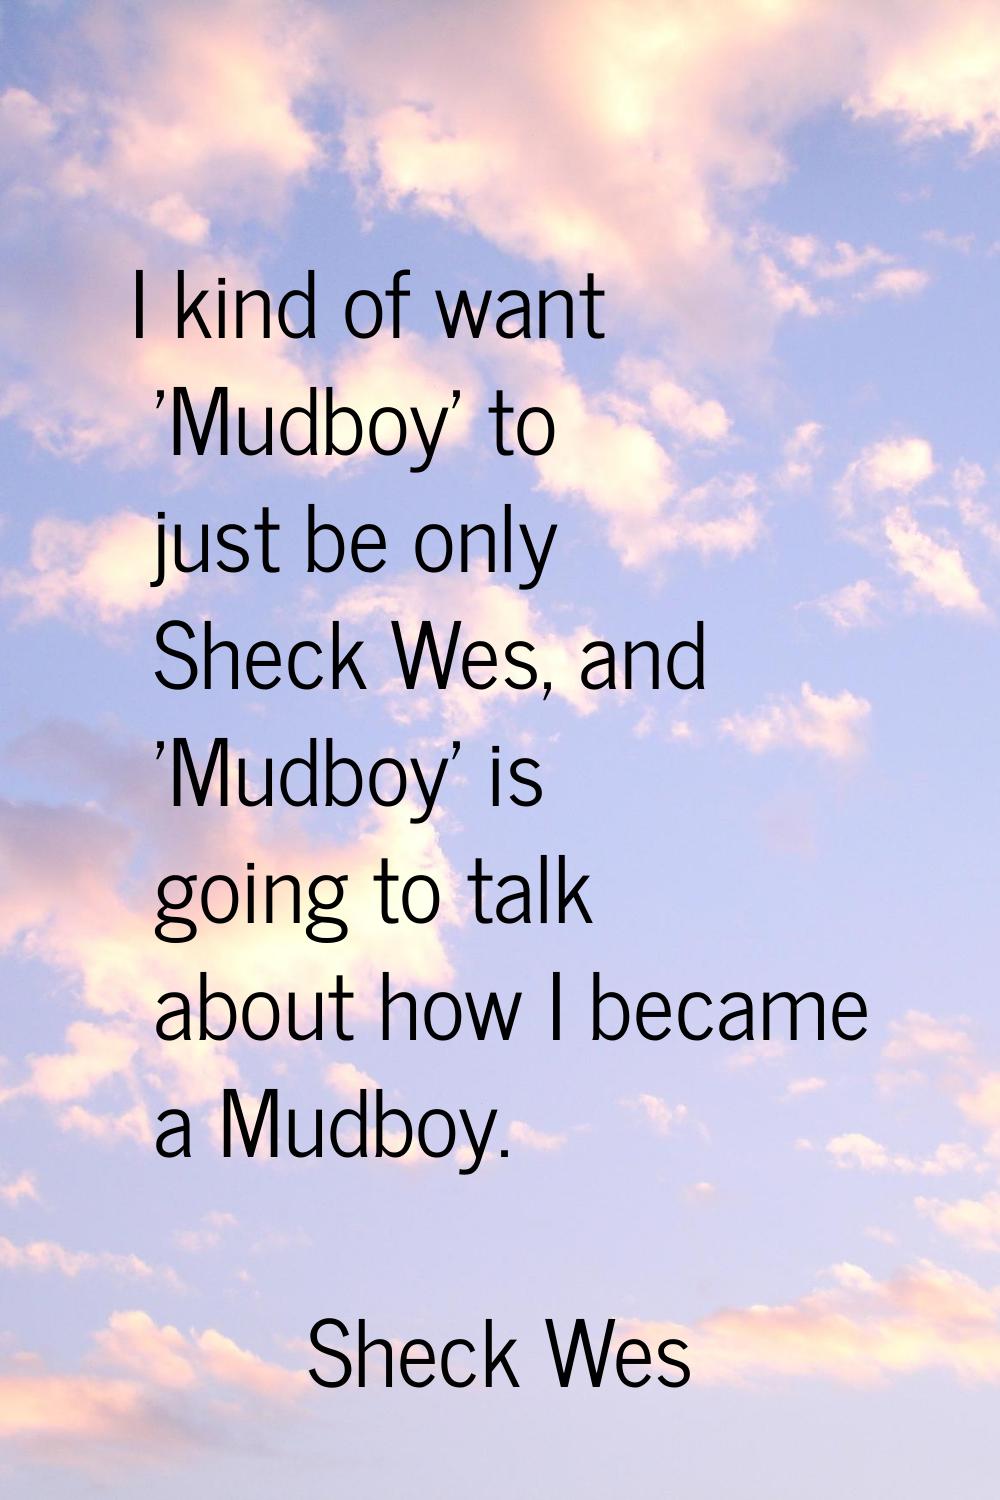 I kind of want 'Mudboy' to just be only Sheck Wes, and 'Mudboy' is going to talk about how I became